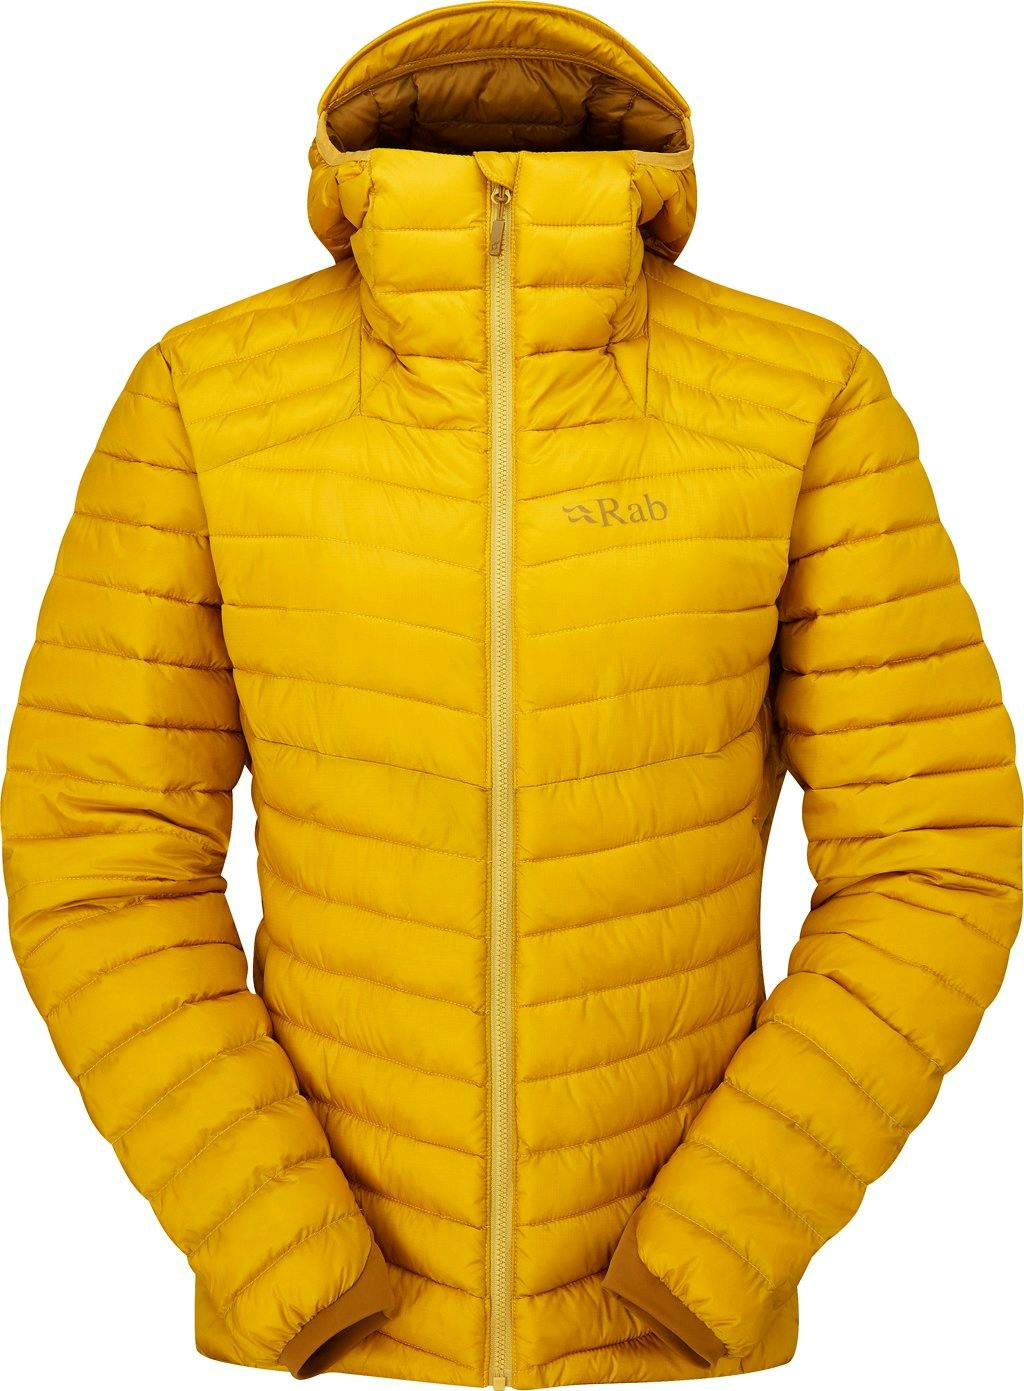 Product image for Cirrus Alpine Jacket - Women's